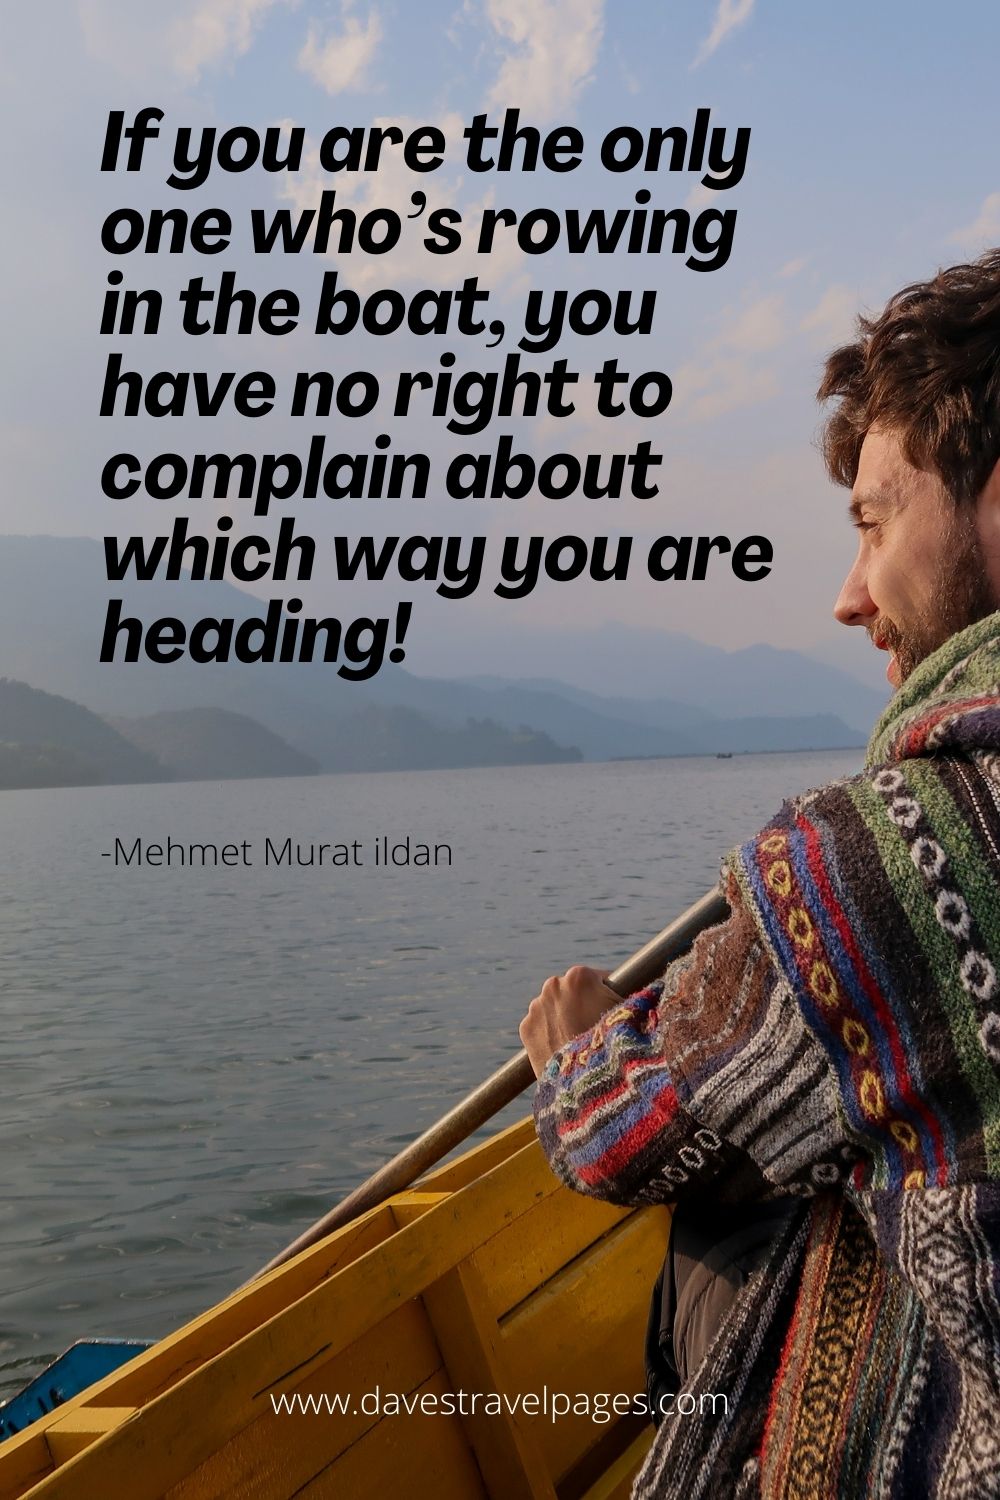 If you are the only one who’s rowing in the boat, you have no right to complain about which way you are heading!